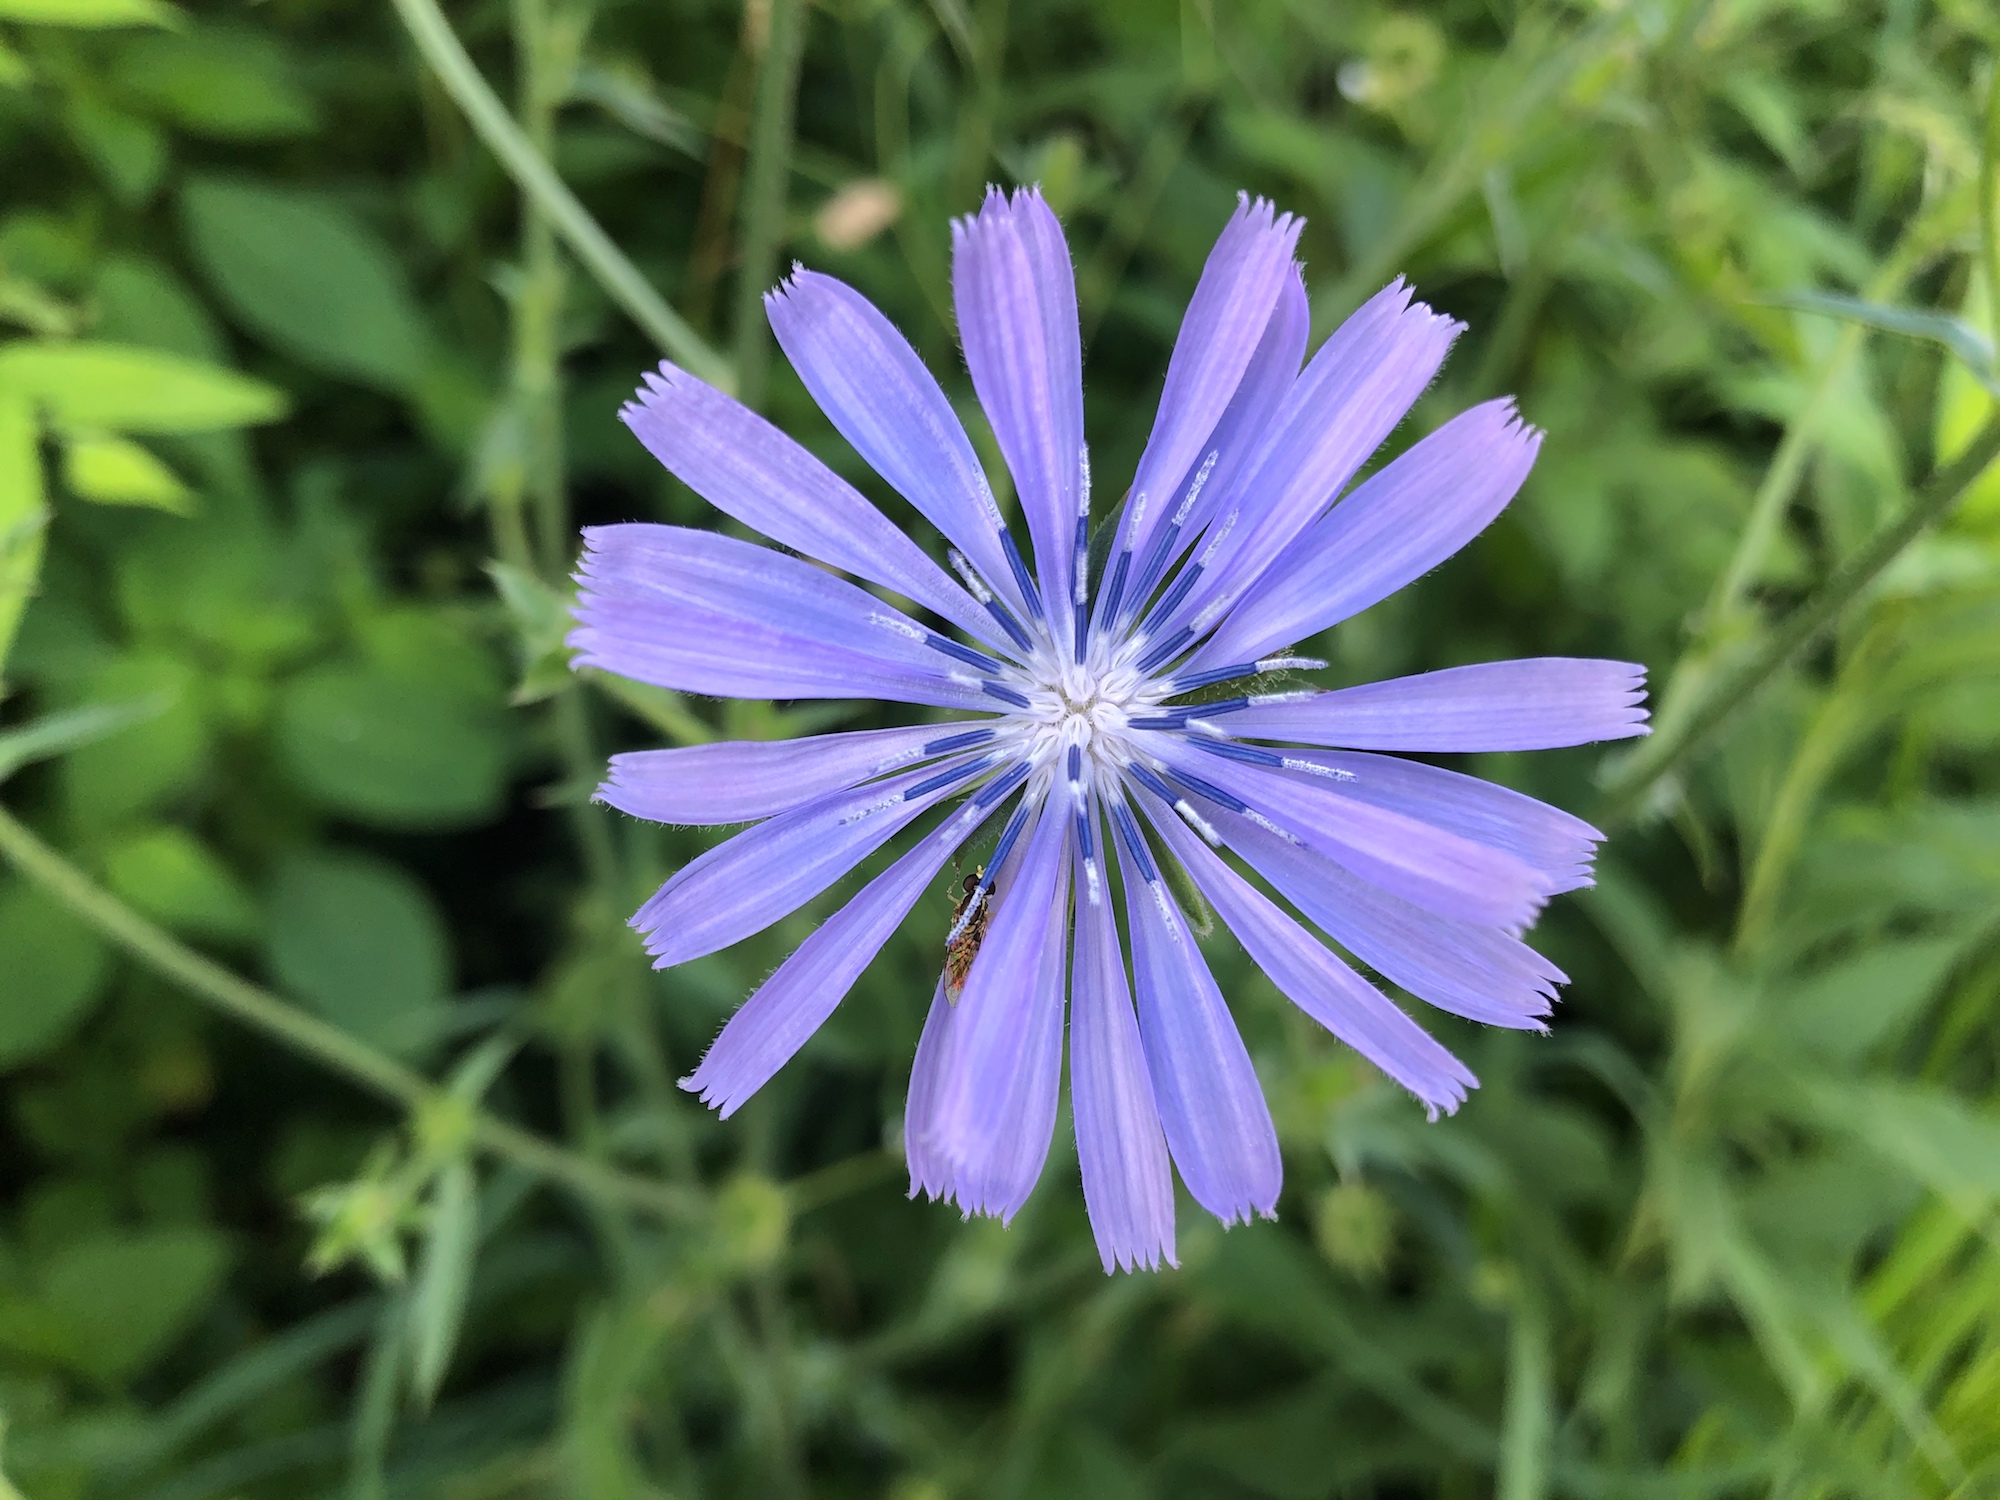 Chicory in Marion Dunn Prairie in Madison, Wisconsin on July 7, 2019.